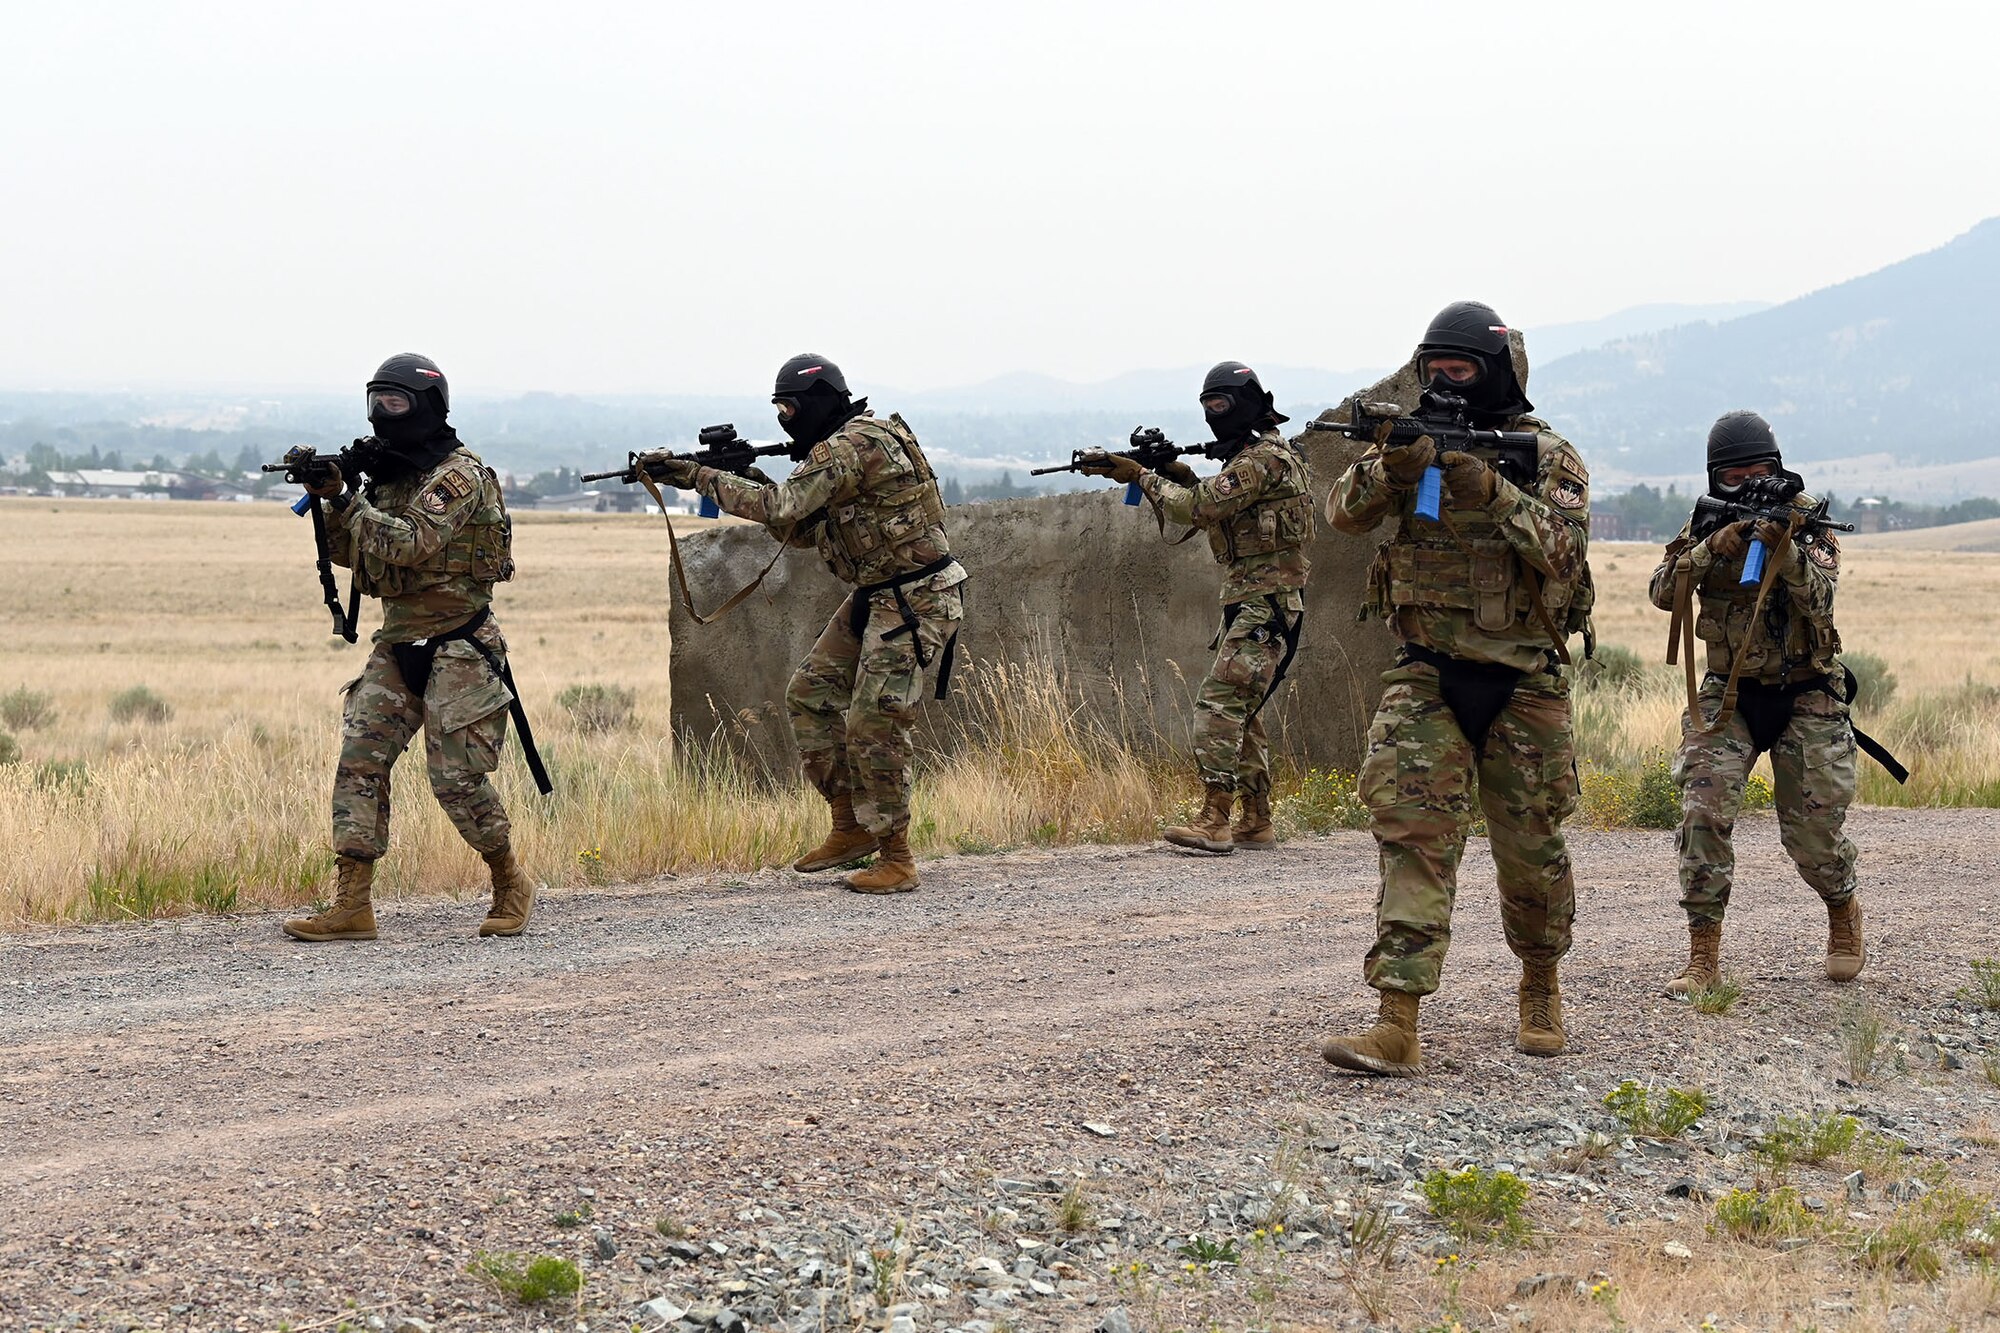 Defenders from the 841st Missile Security Forces Squadron patrol a village road in formation during a breaching exercise Aug. 17, 2021, at the firing range on Fort Harrison, Mont. The defenders’ M4 carbines are armed with blue clips, which contain training ammunition to be used against simulated enemy combatants throughout the exercise. (U.S. Air Force photo by Airman Elijah Van Zandt)